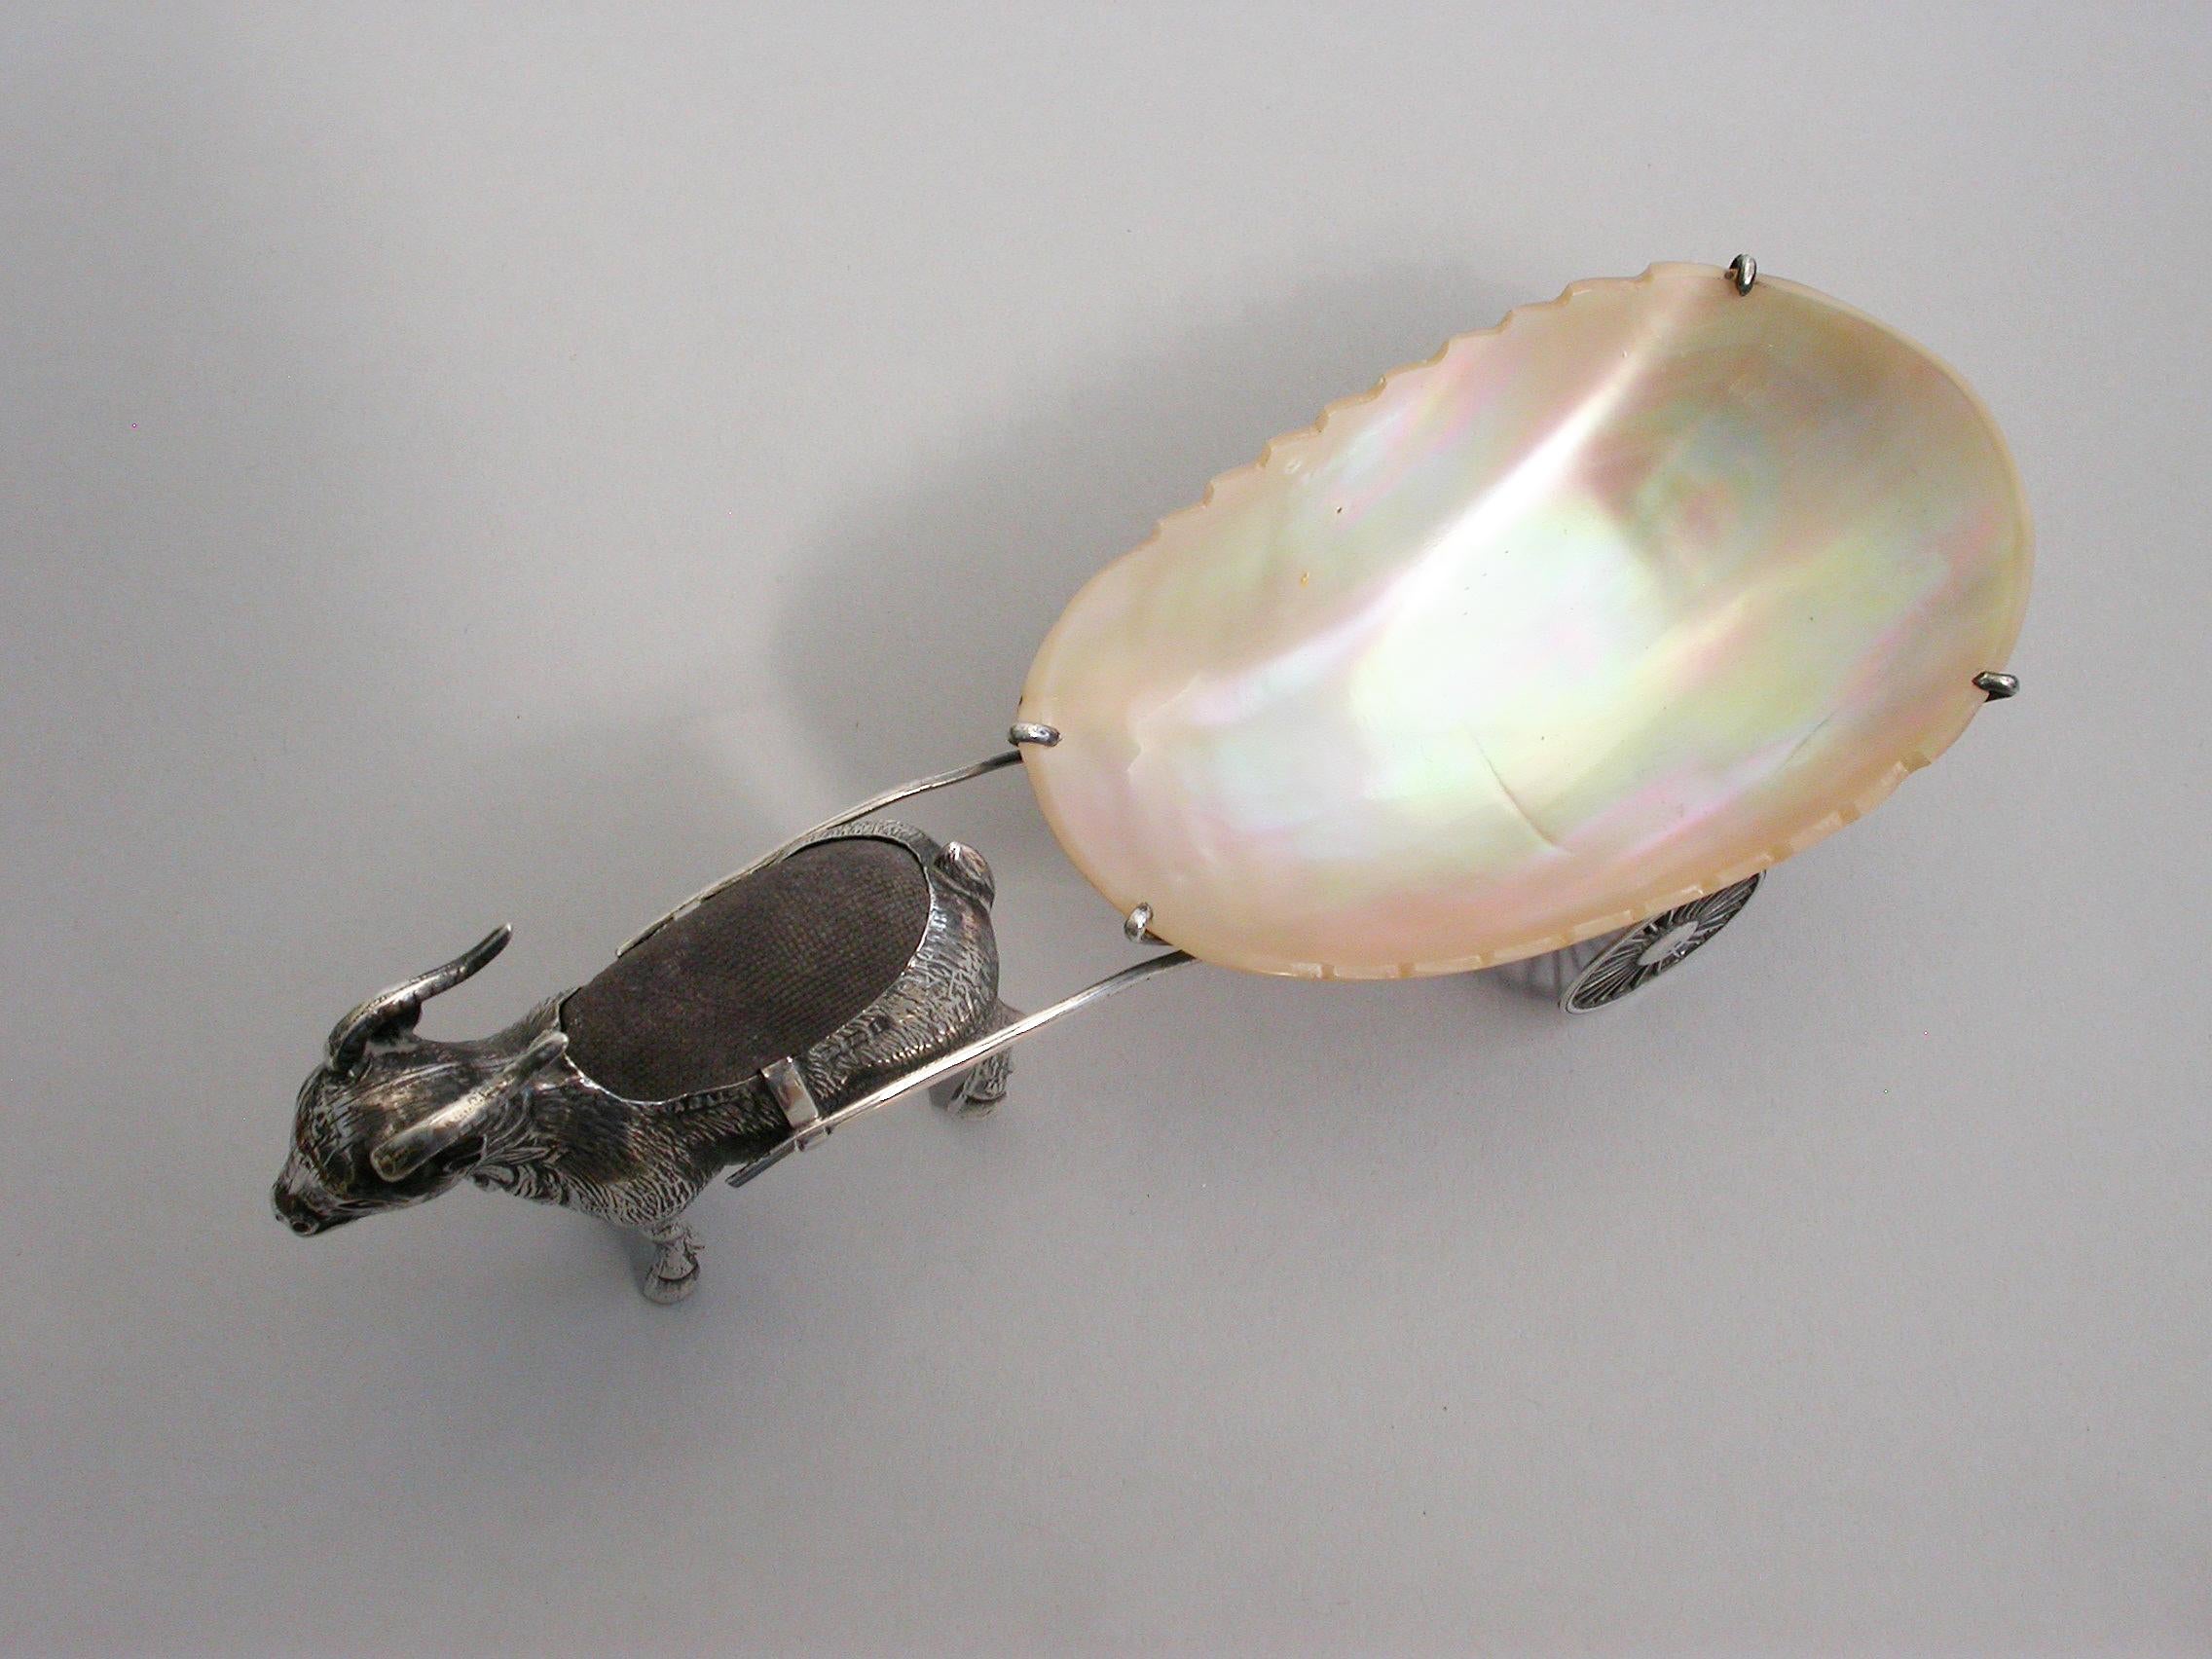 English Edwardian Novelty Silver Goat Pulling a Cart Pin Cushion by Adie & Lovekin, 1908 For Sale